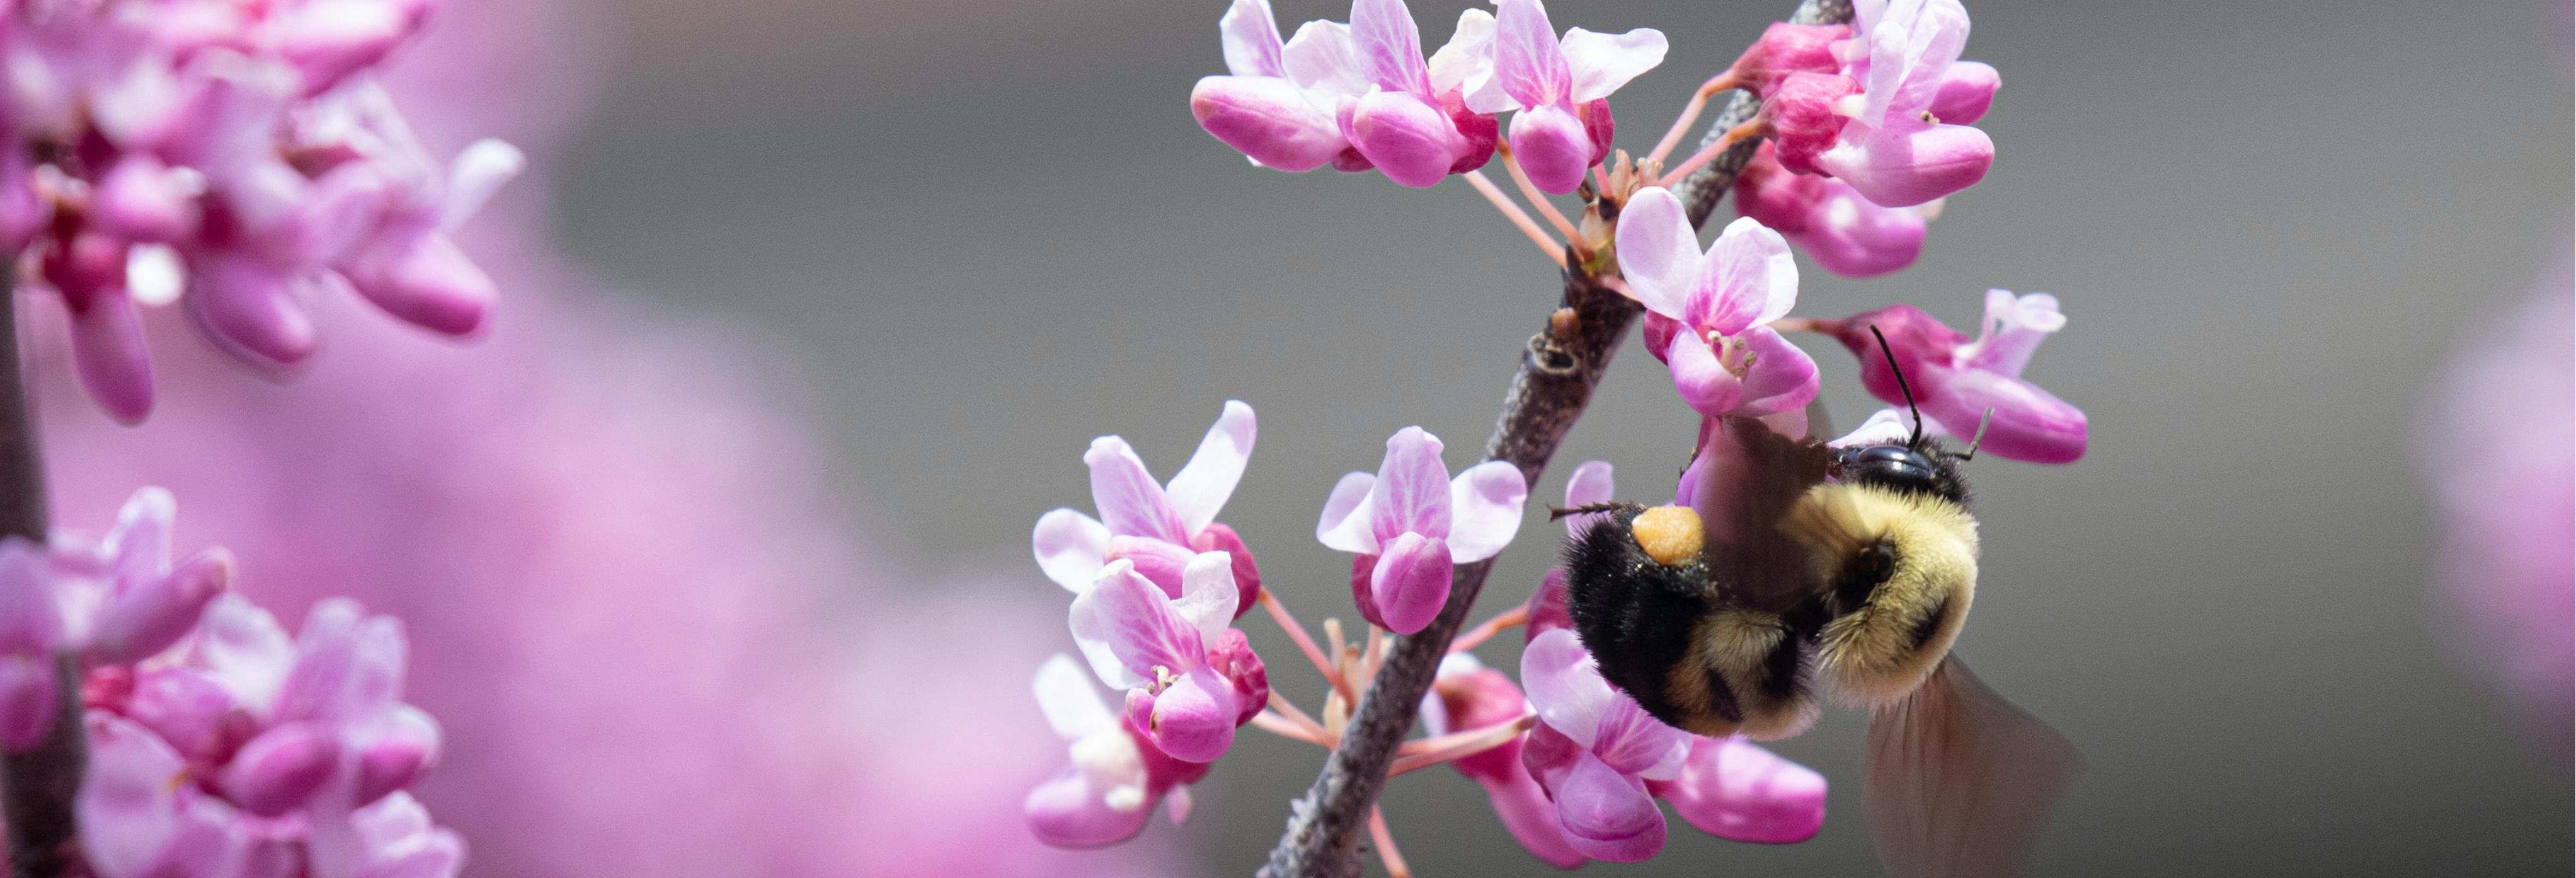 Brown-belted bumble bee pollinates a redbud flower